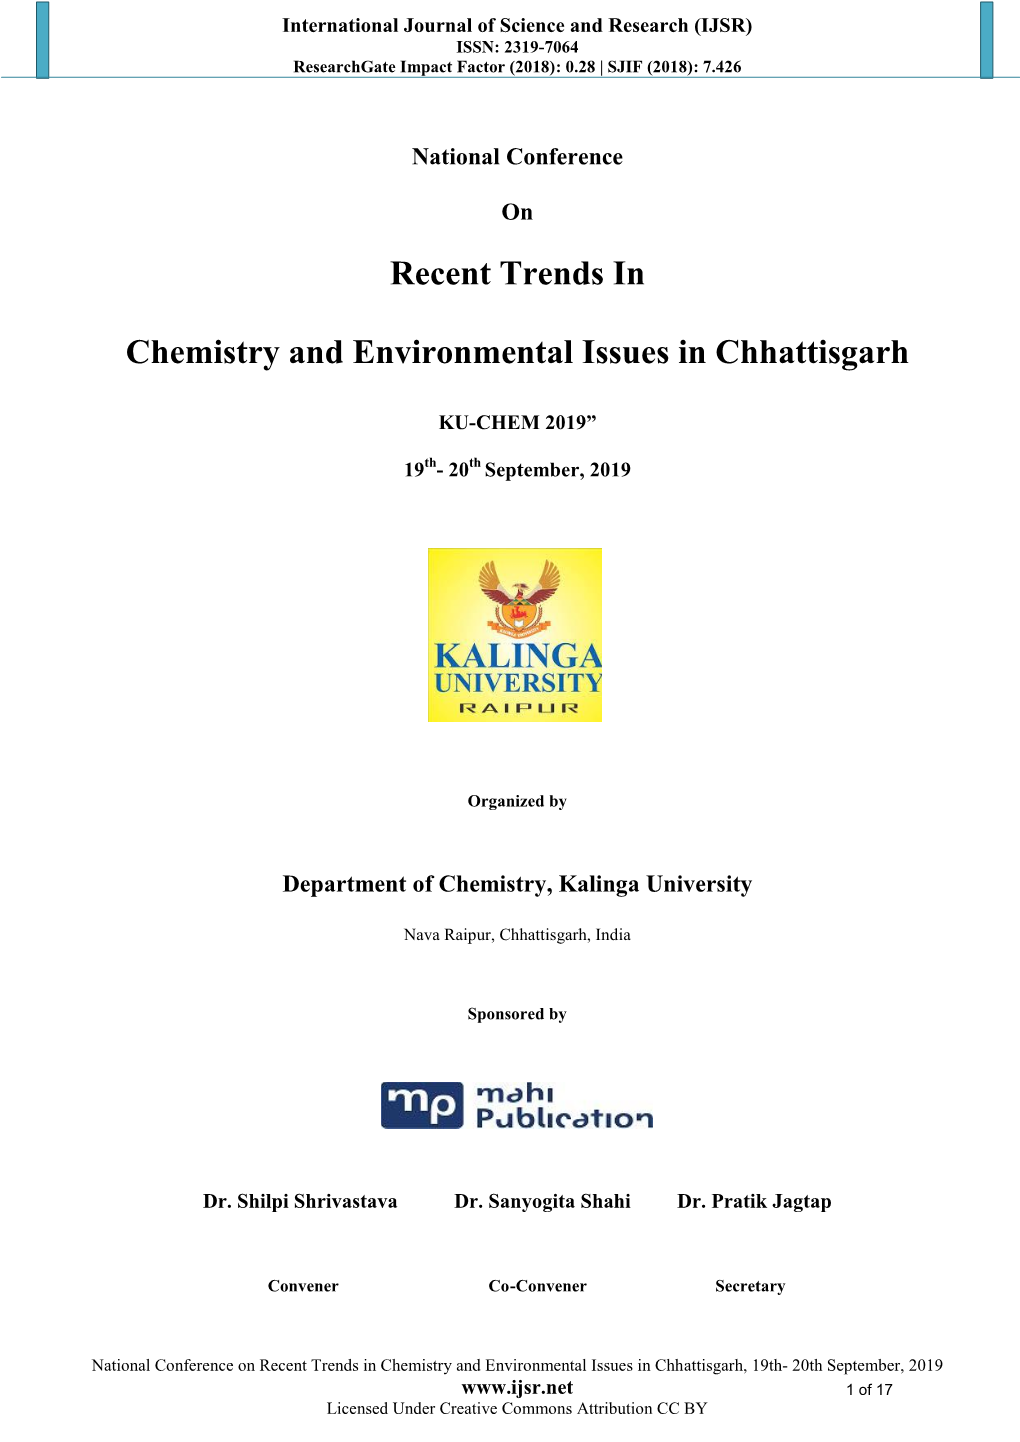 Recent Trends in Chemistry and Environmental Issues in Chhattisgarh